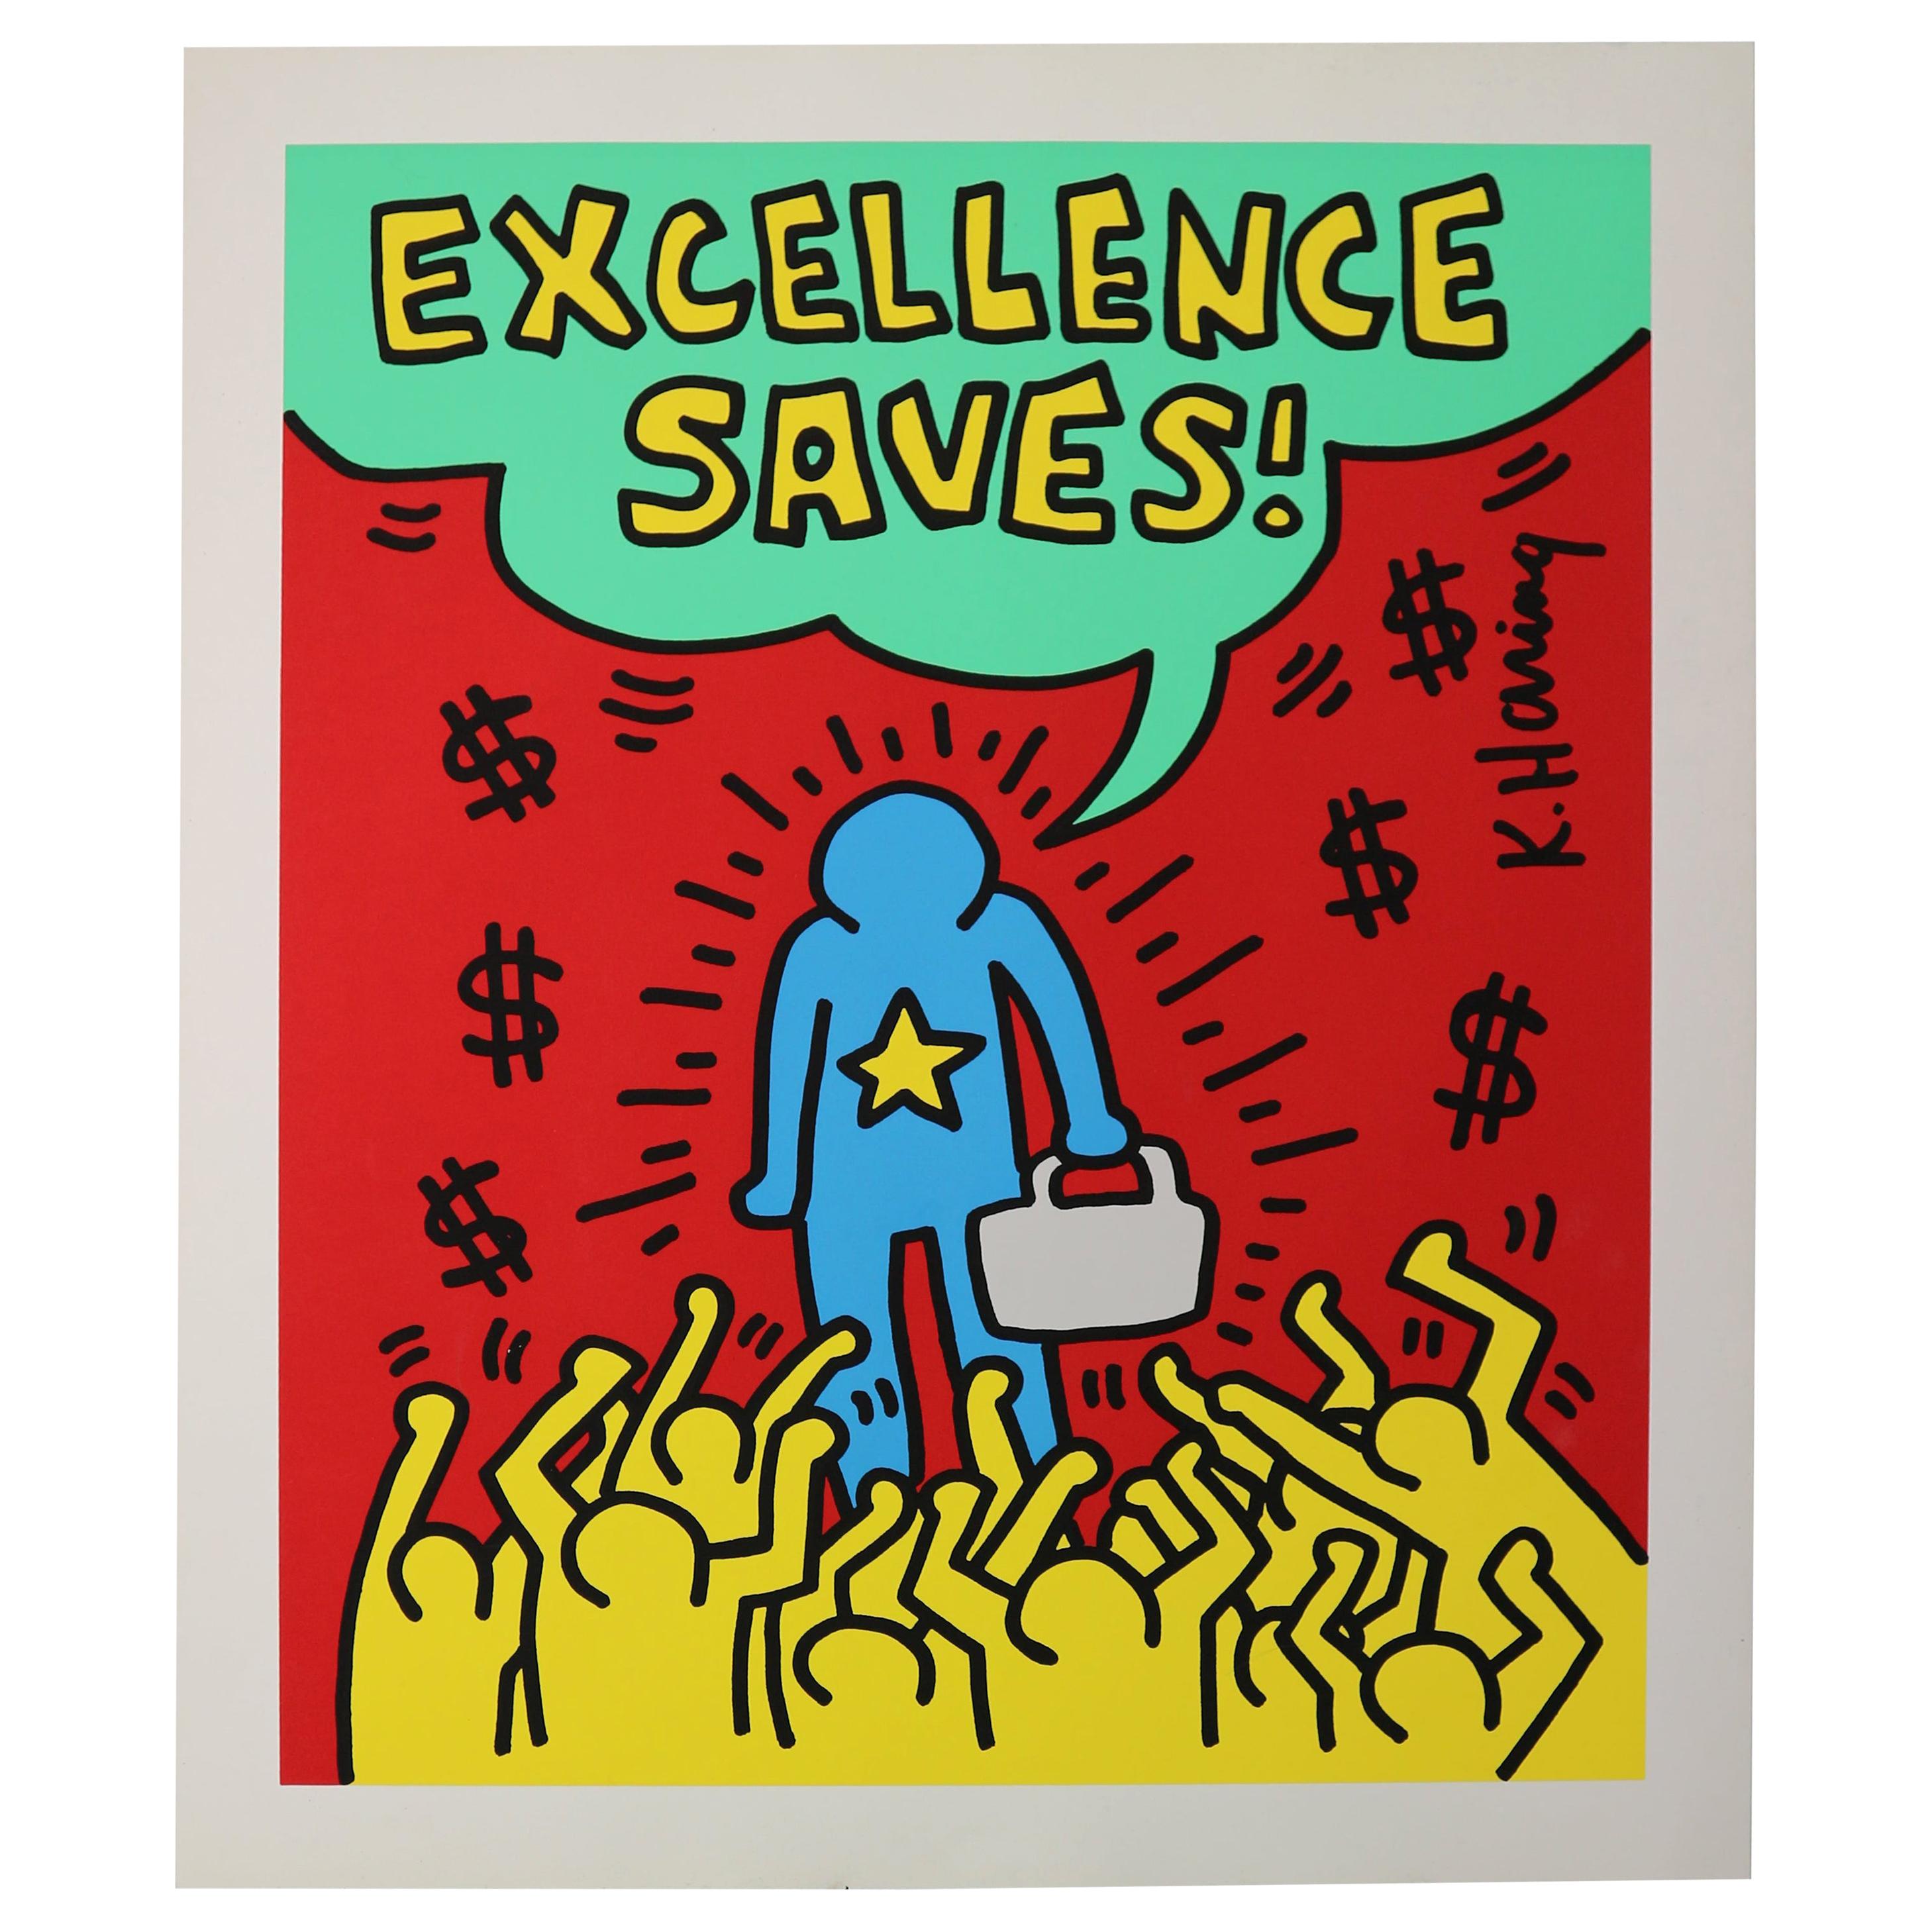 Silkscreen Poster by Keith Haring Lithograph "Excellence Saves", 1994